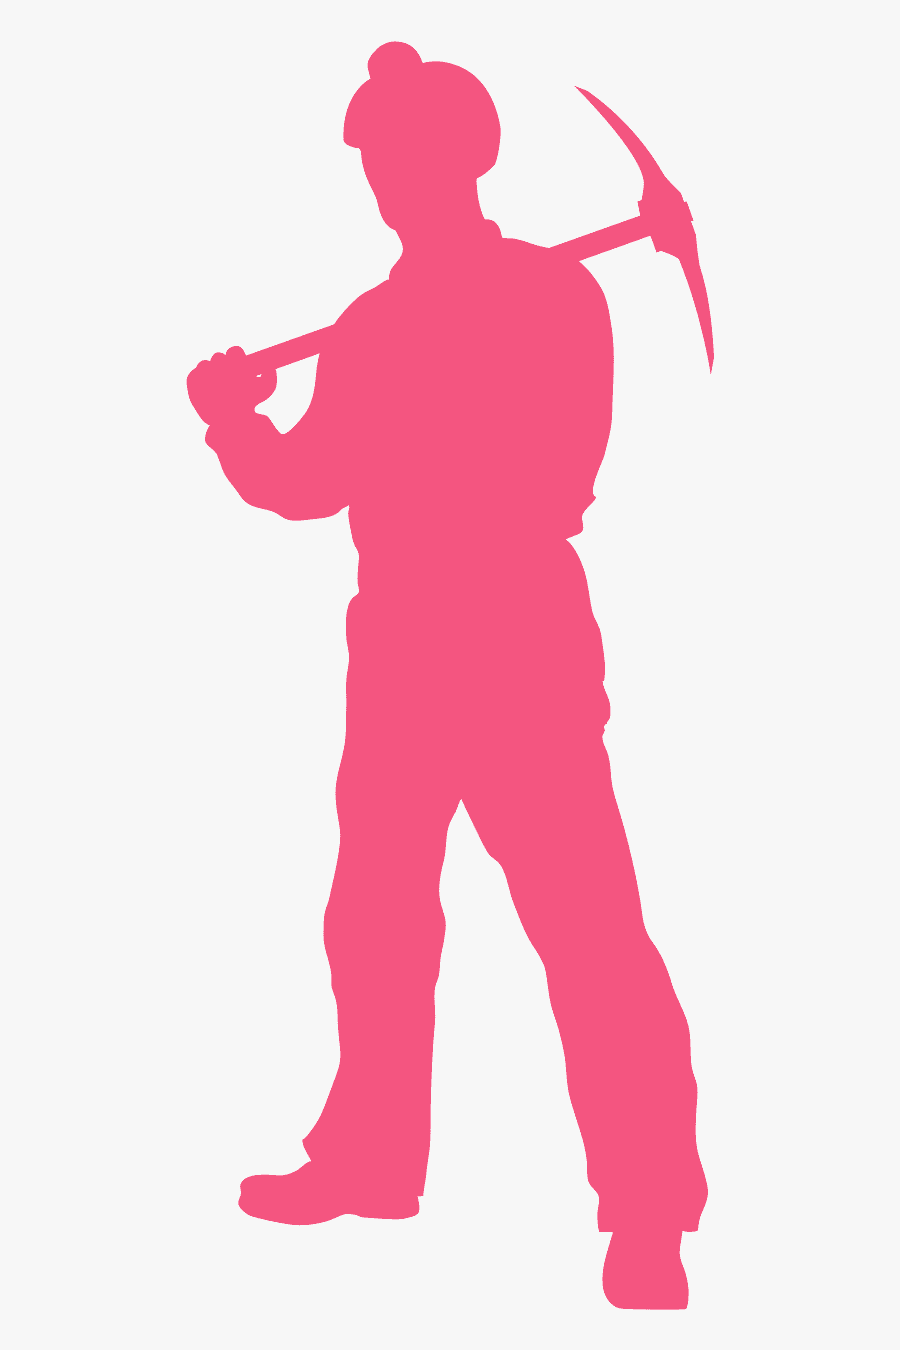 Coal Miner Silhouette , Free Transparent Clipart - ClipartKey.